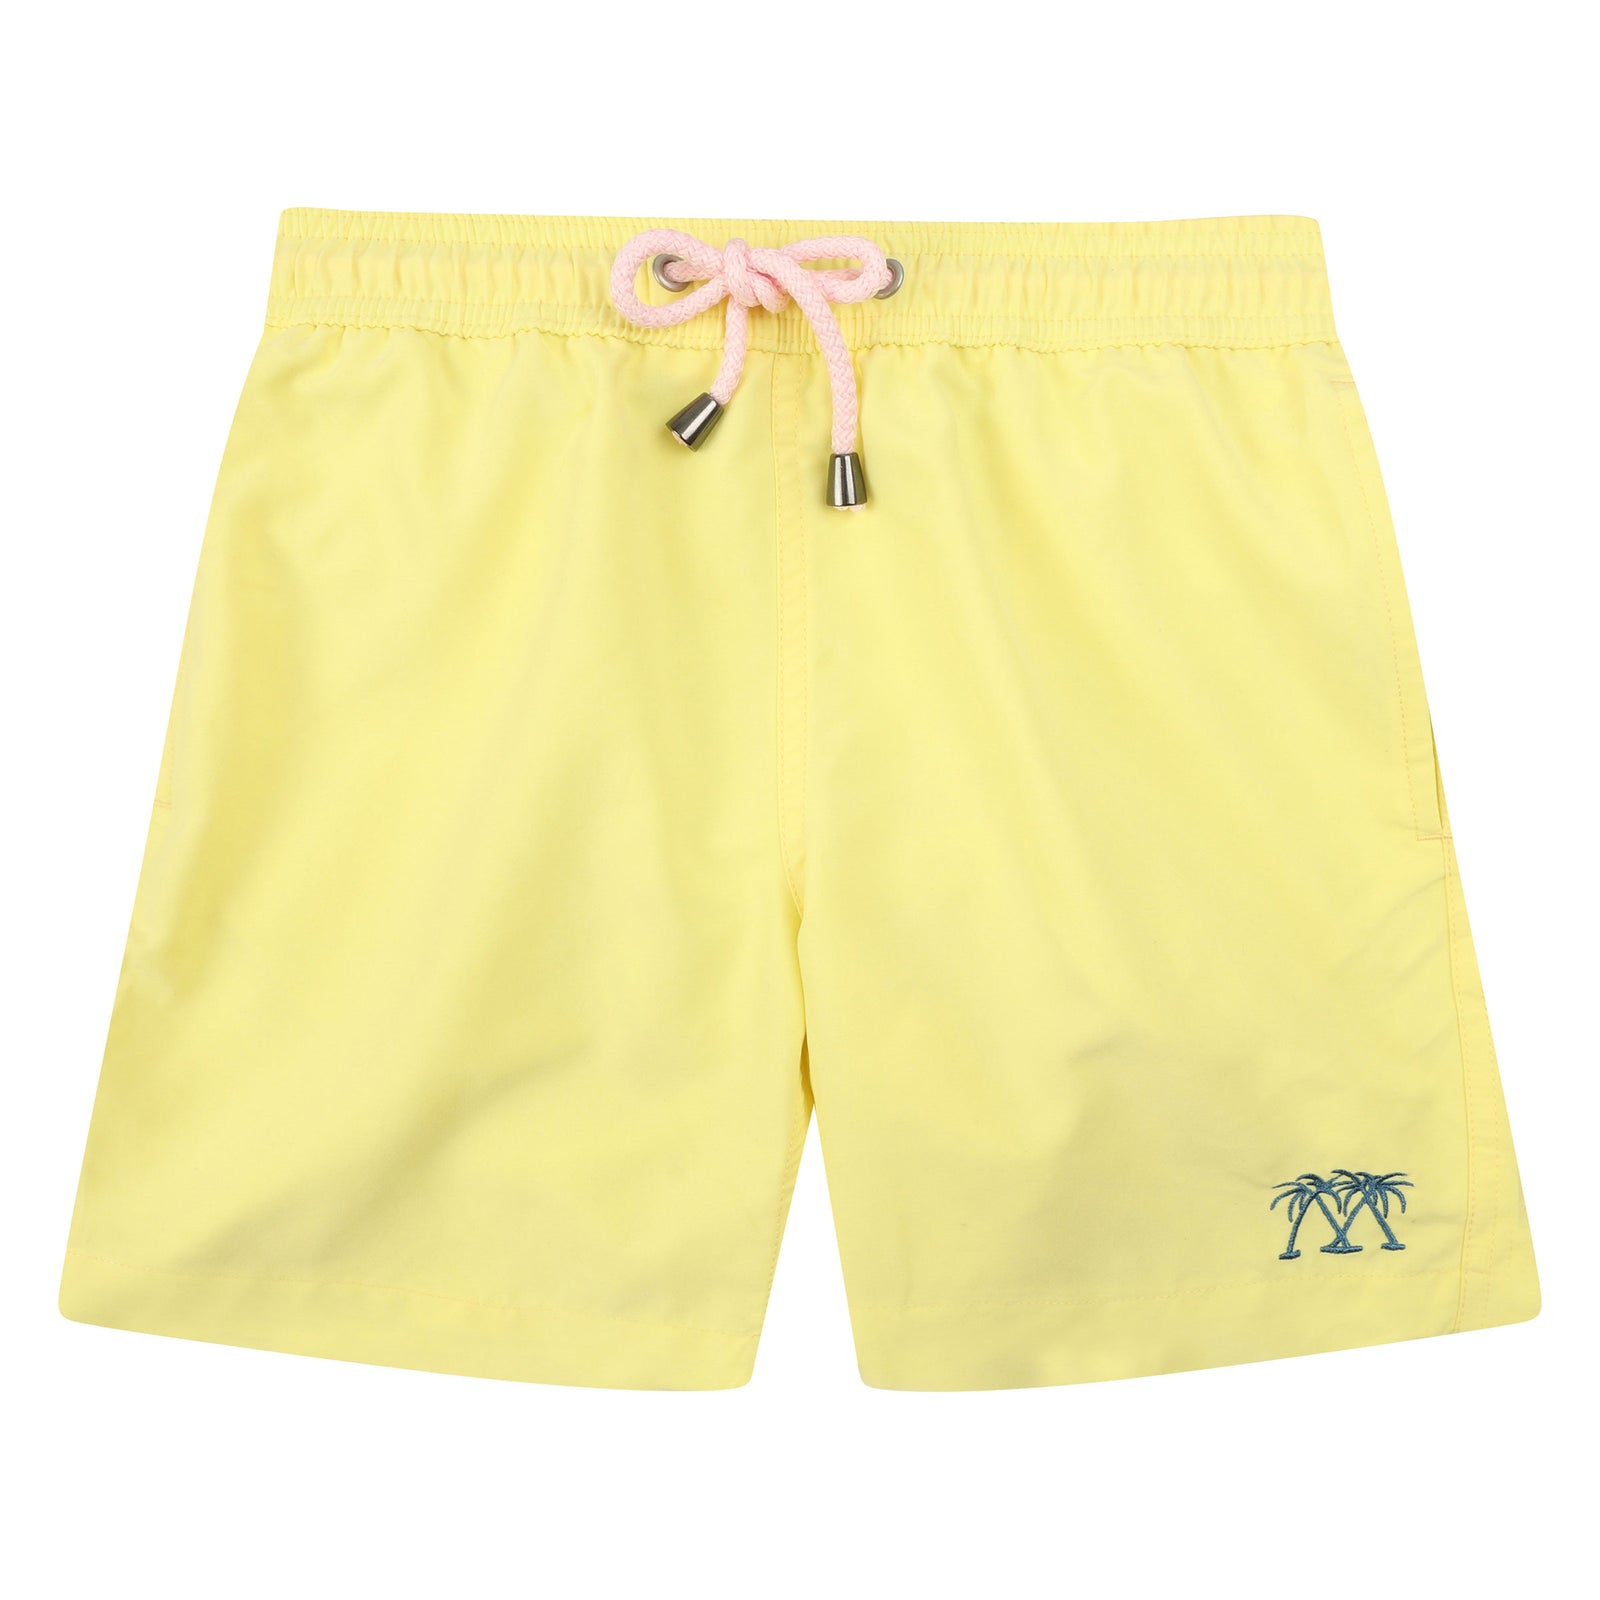 Boys swim trunks: YELLOW - Pink House Mustique